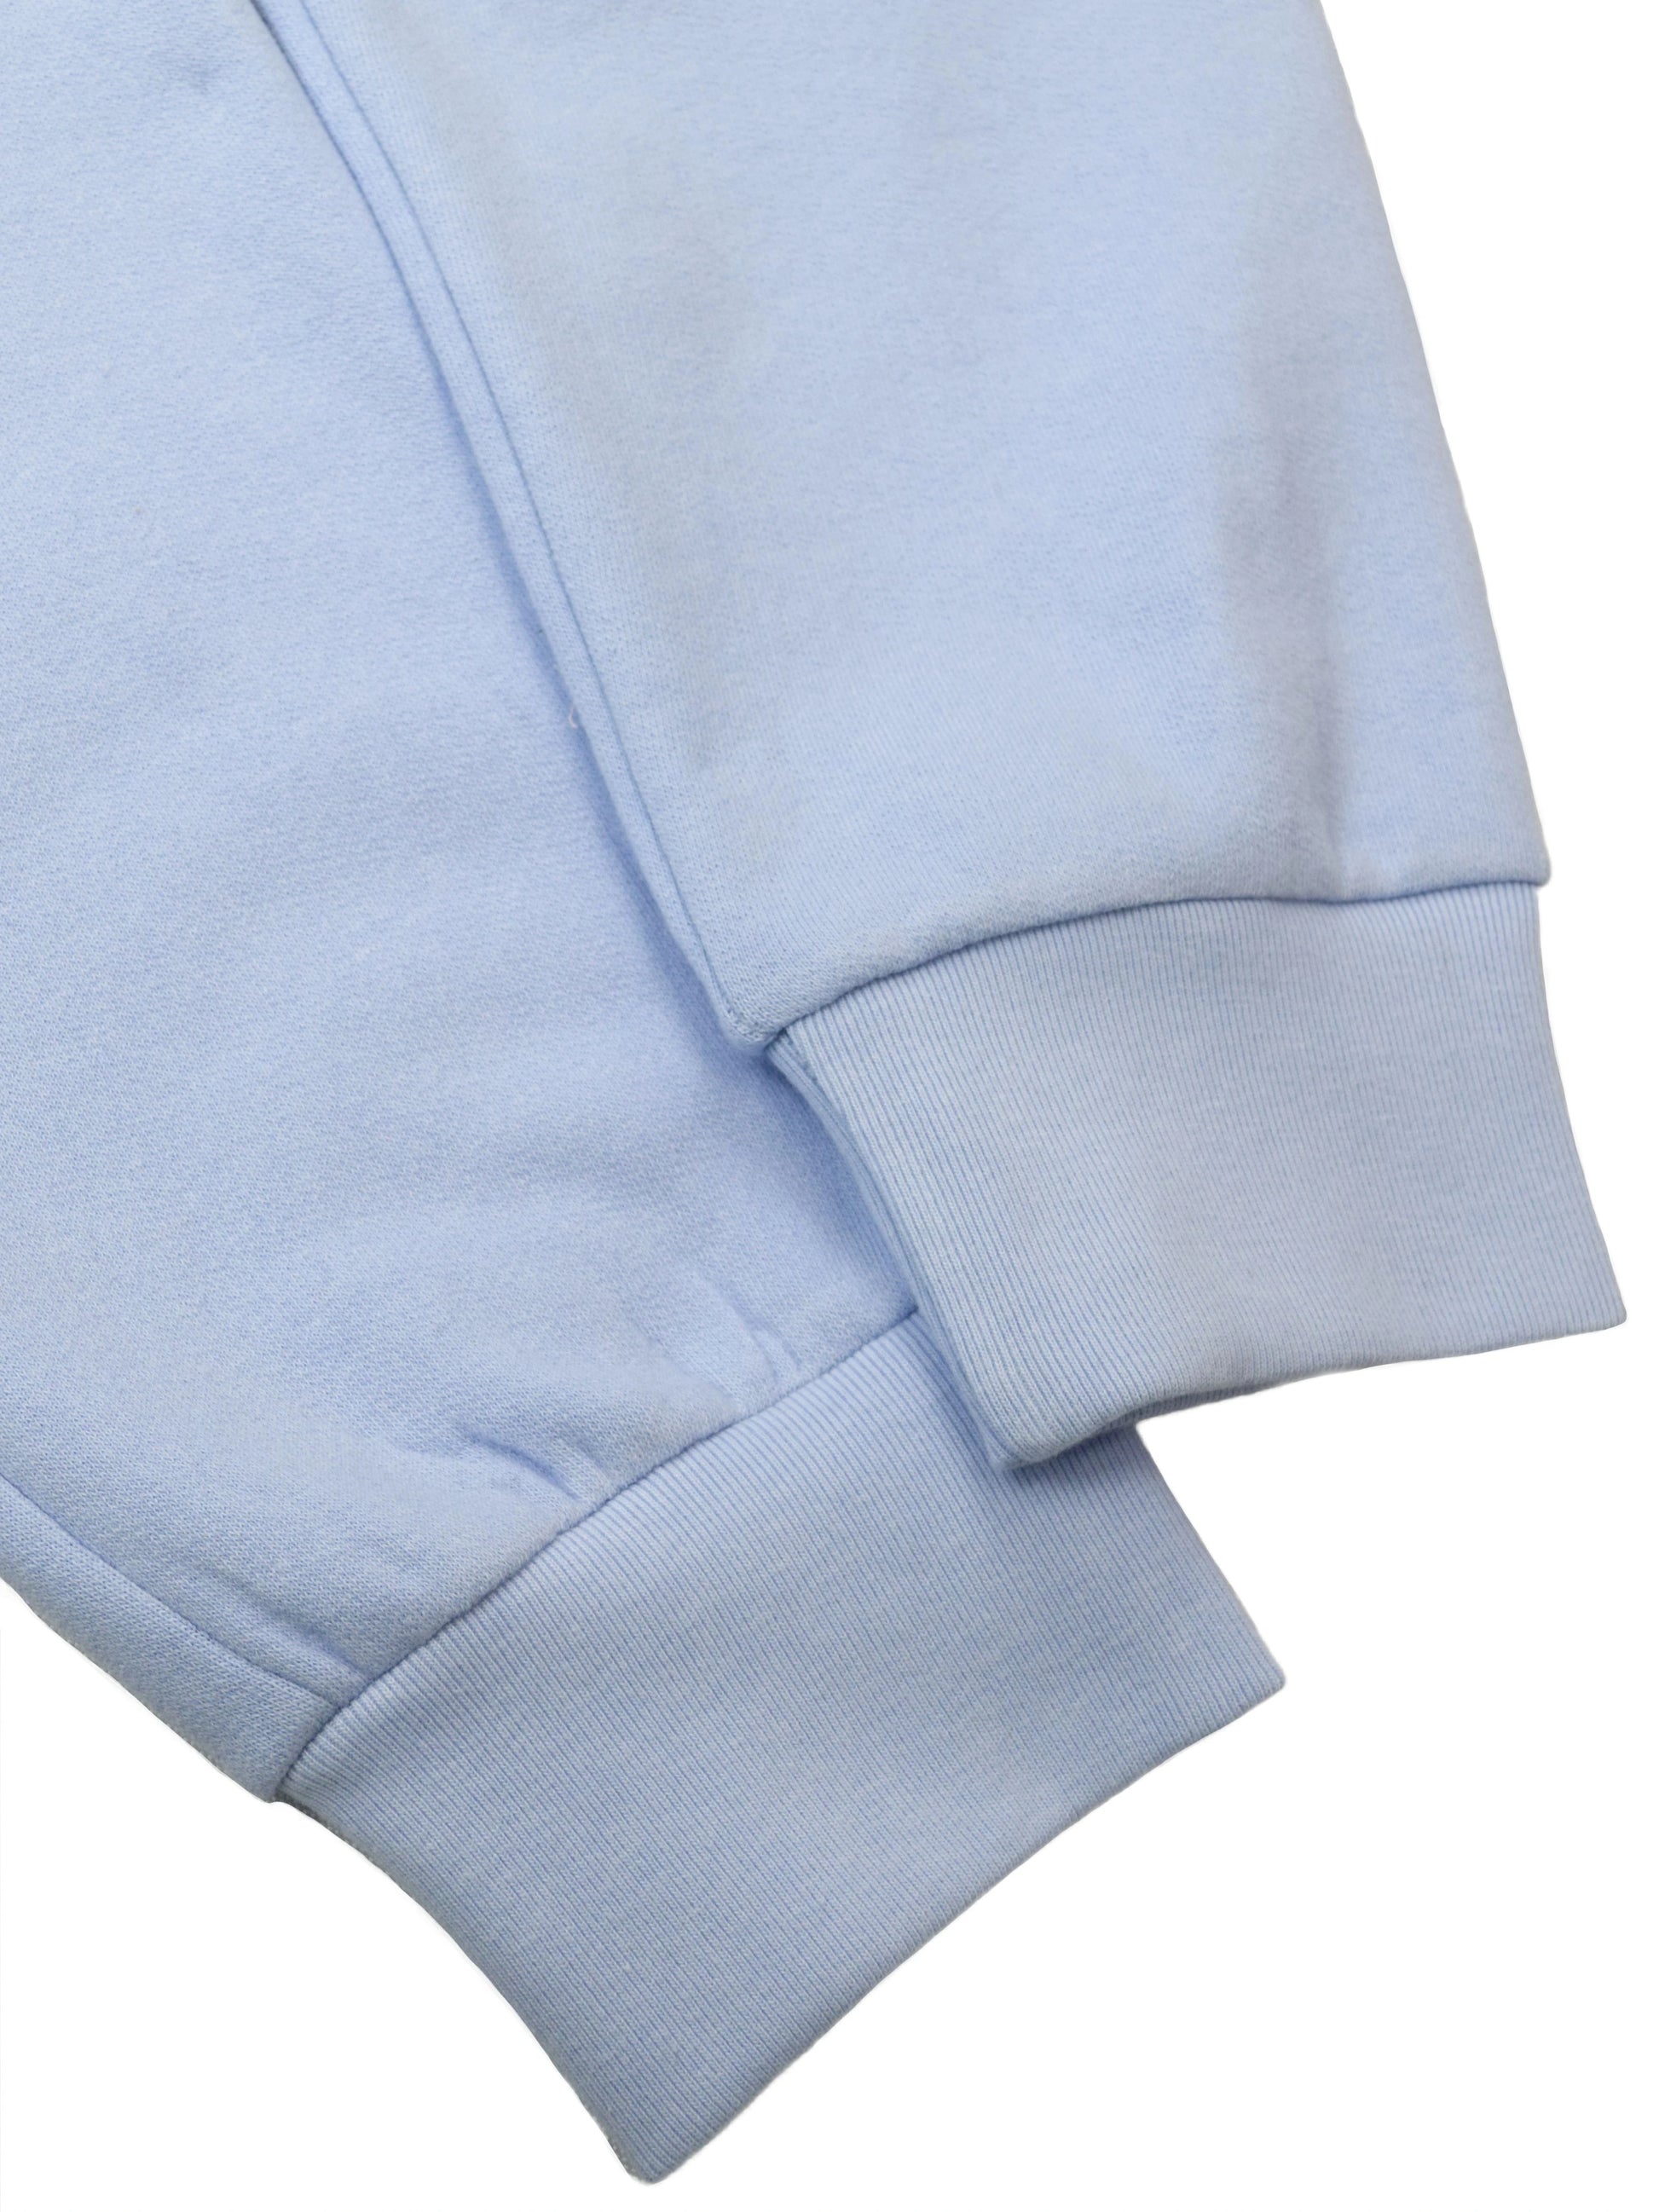 Tight-fitted cuffs of fleece sweapants, in sky blue color